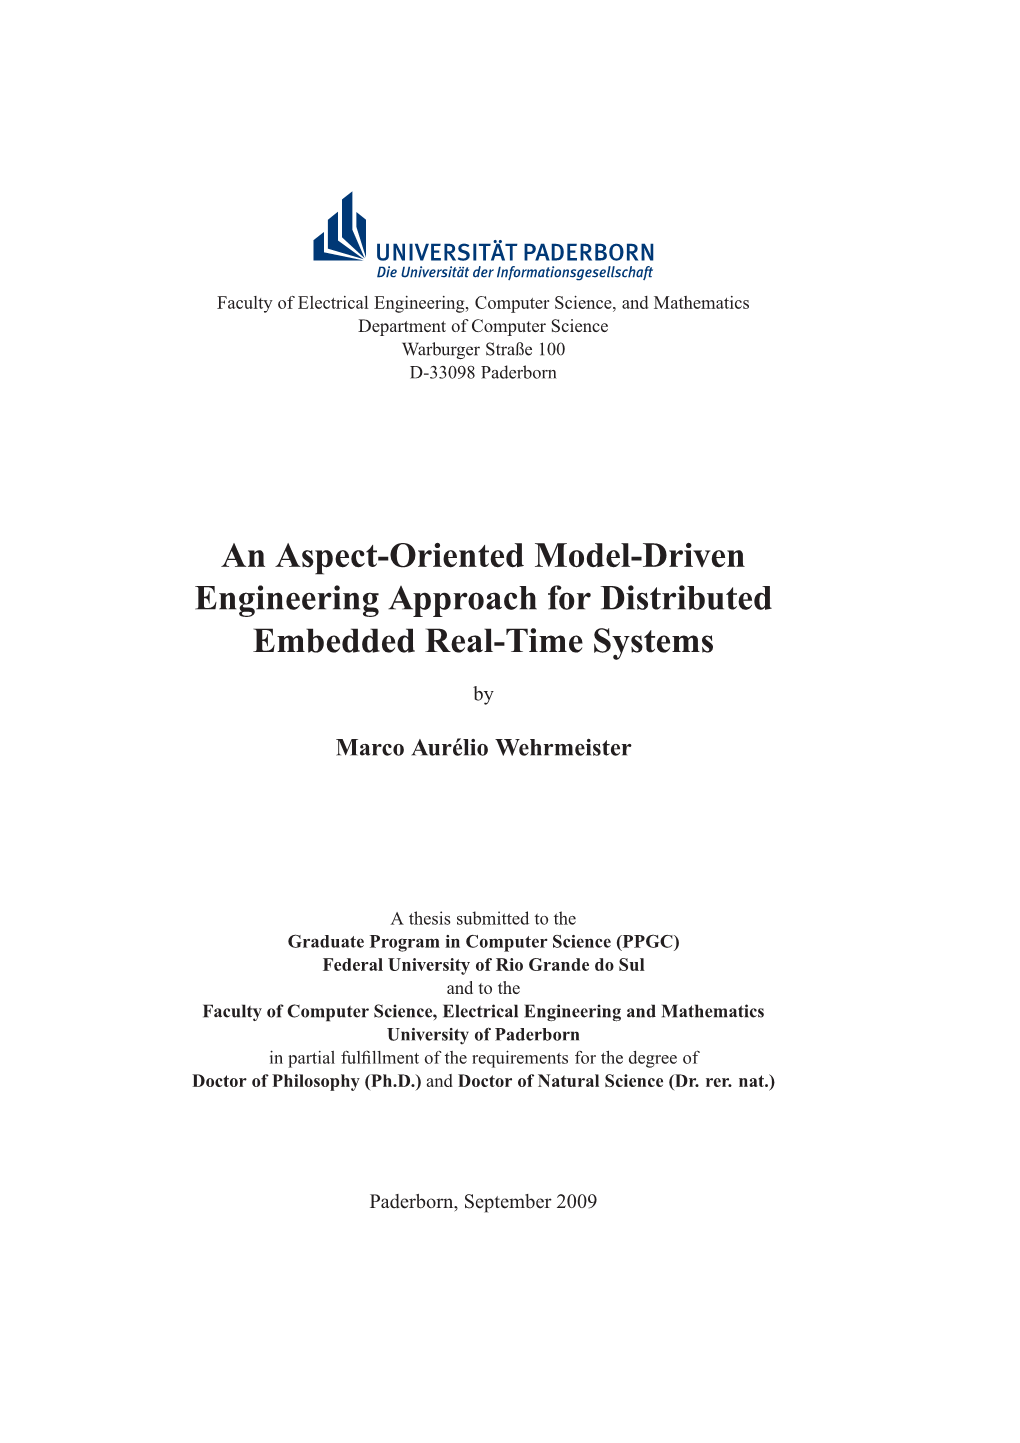 An Aspect-Oriented Model-Driven Engineering Approach for Distributed Embedded Real-Time Systems